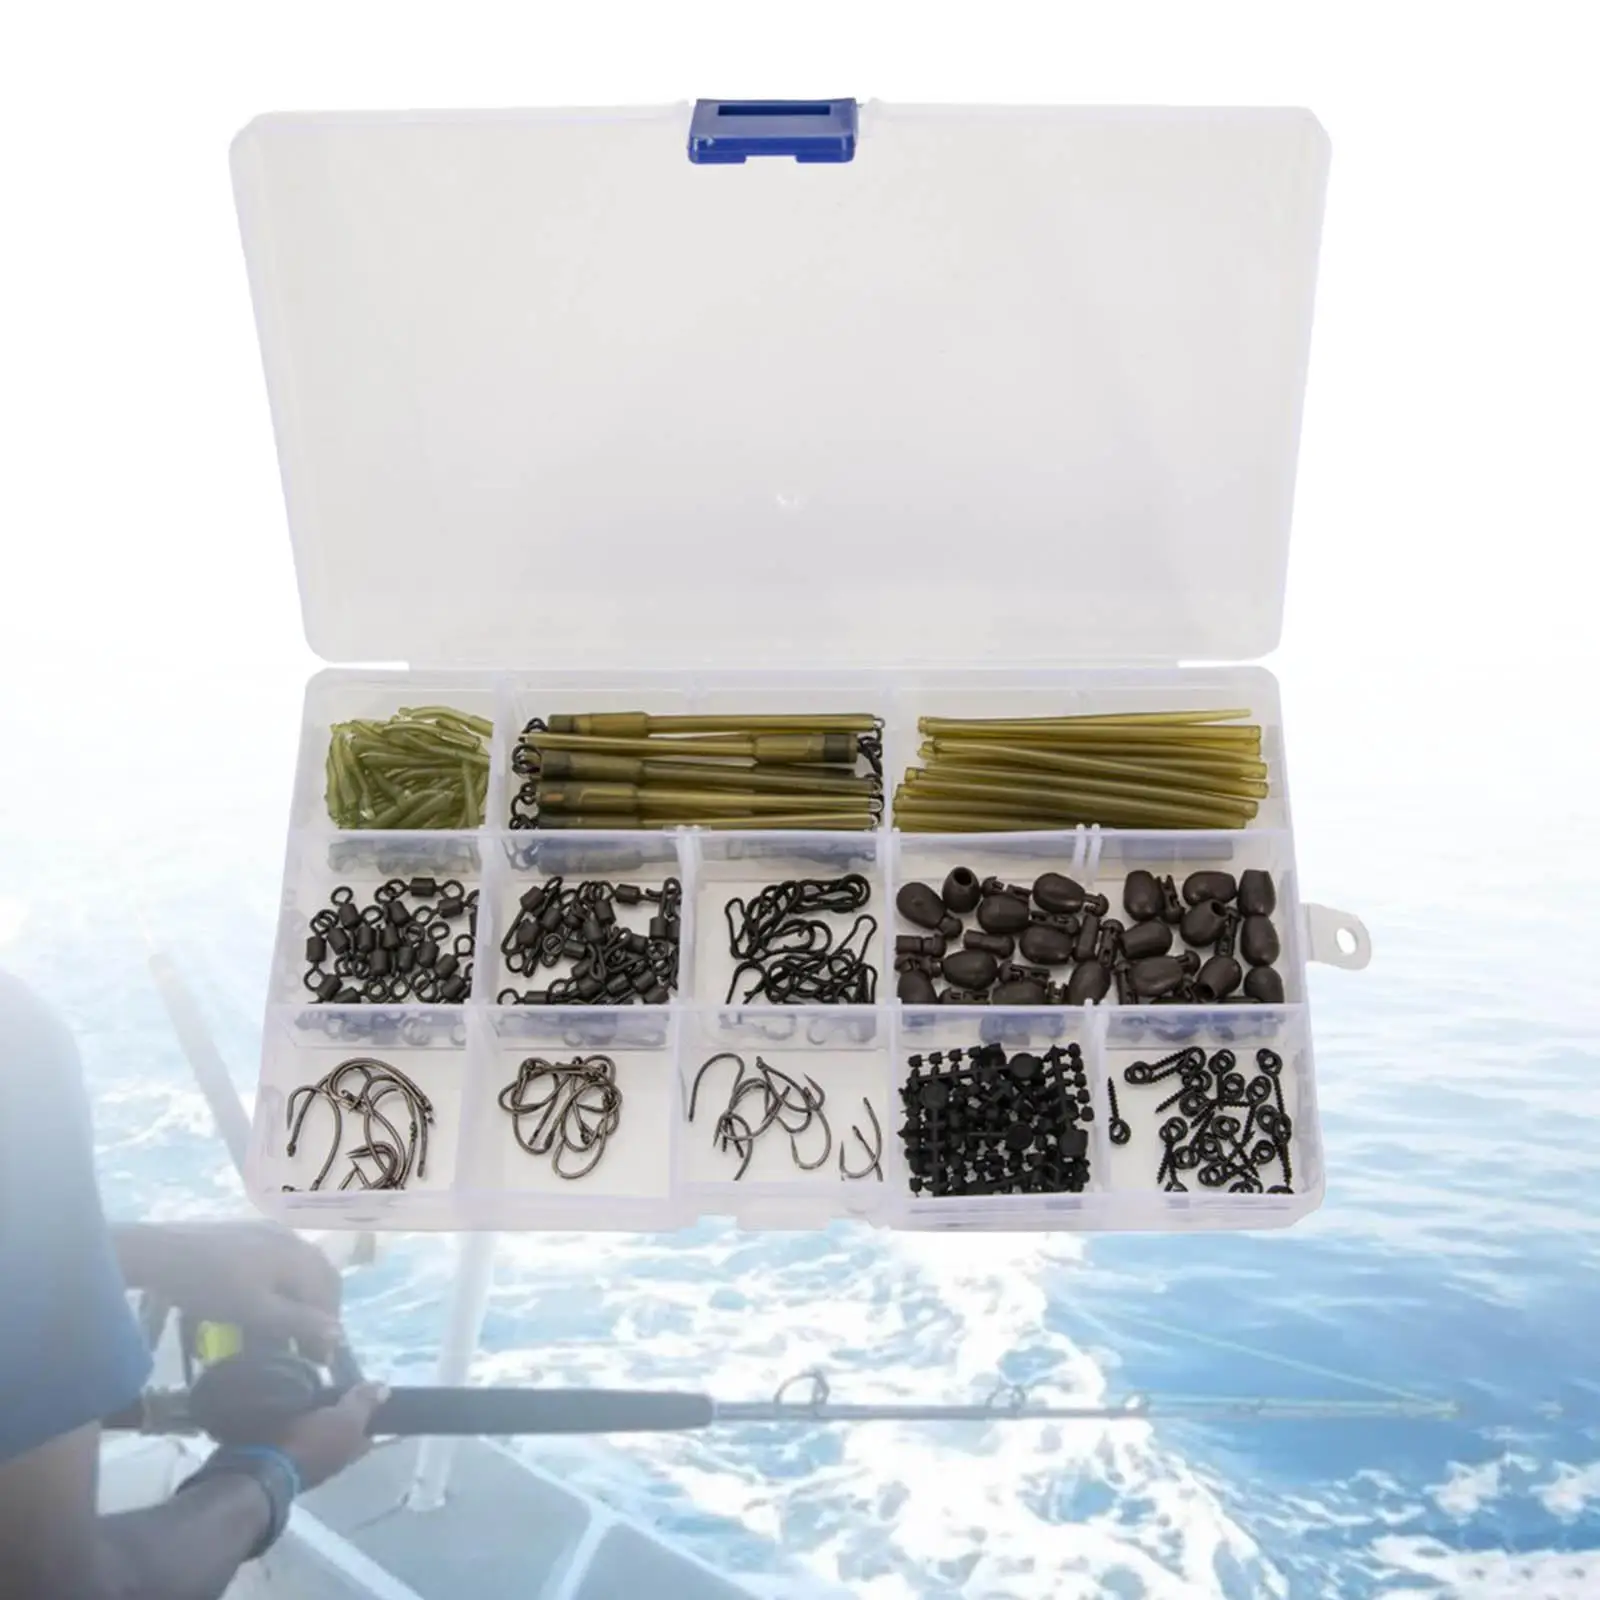 Carp Fishing Accessories W/ Portable Case - Quick Change Swivel, Carp Hooks, Tail Rubber Sleeves Tackle Box Kit